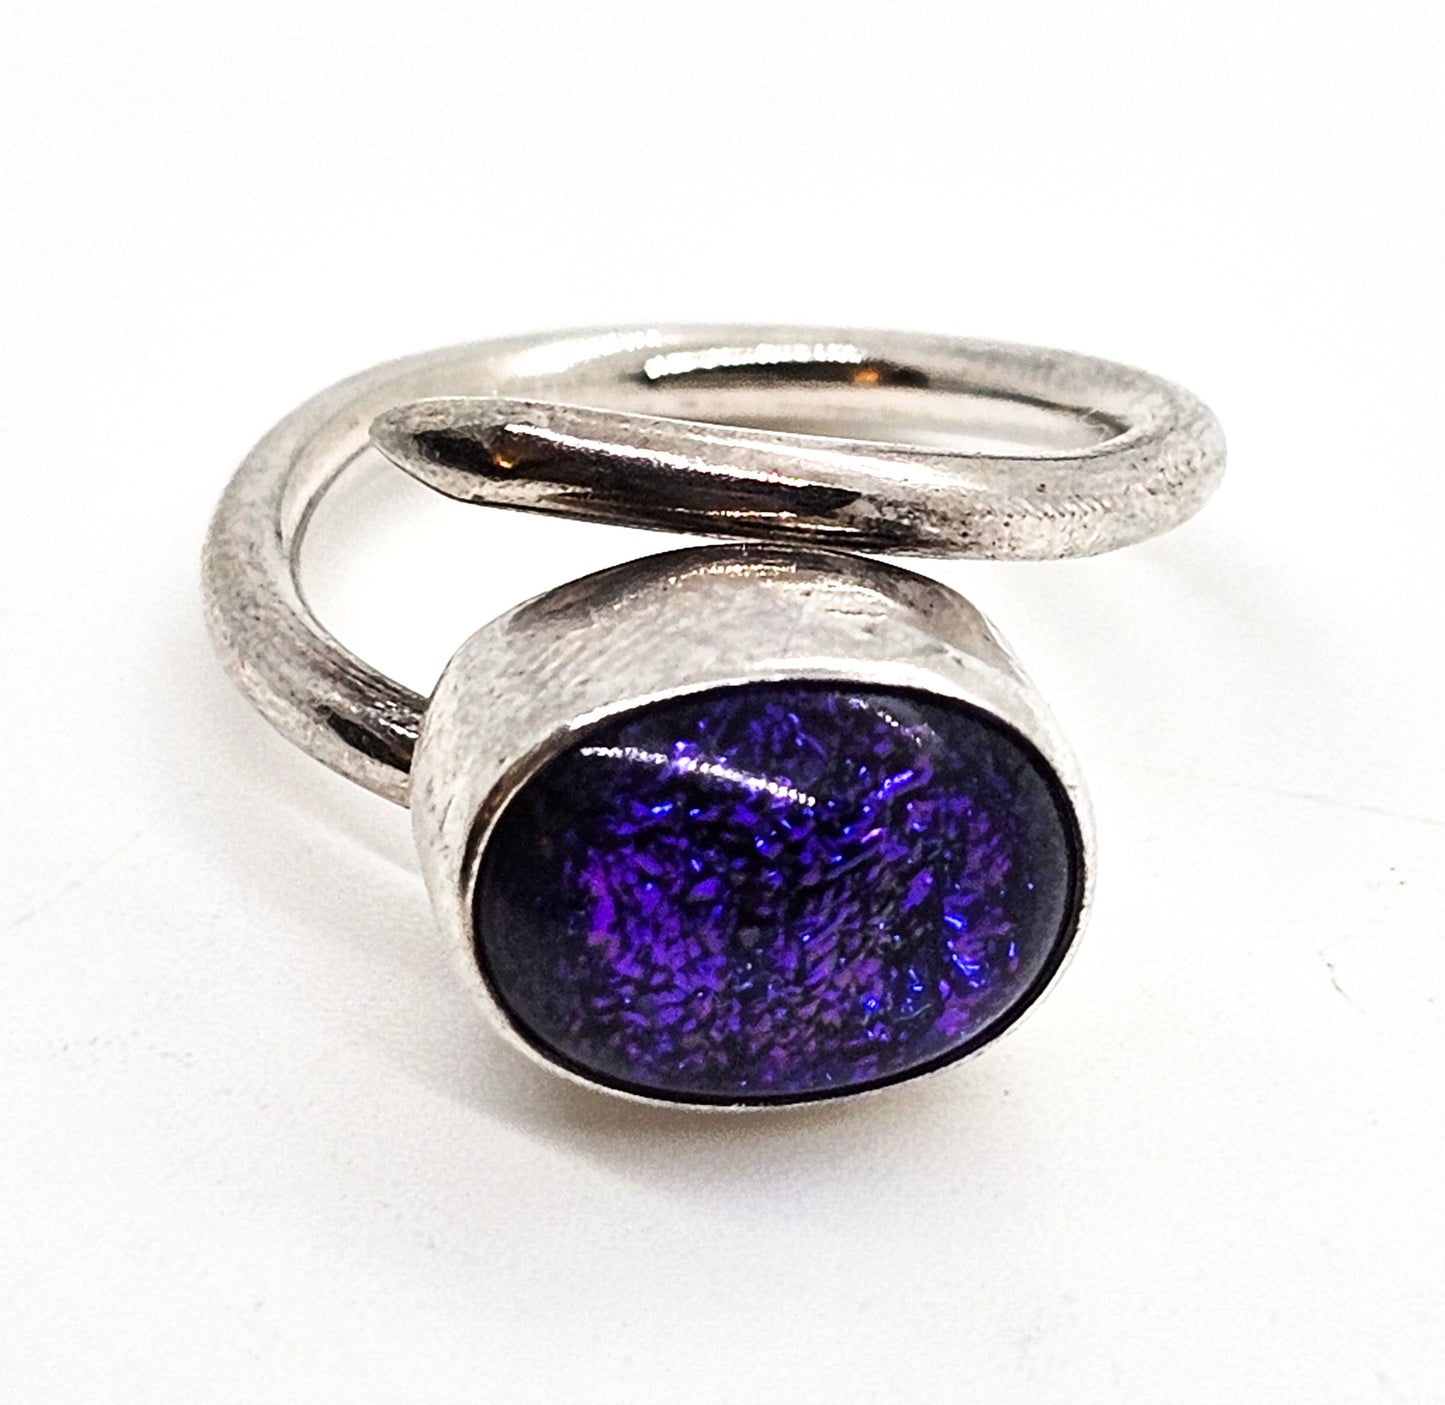 Blue Dichroic glass sterling silver torsade adjustable wrap sterling silver ring size 7.5